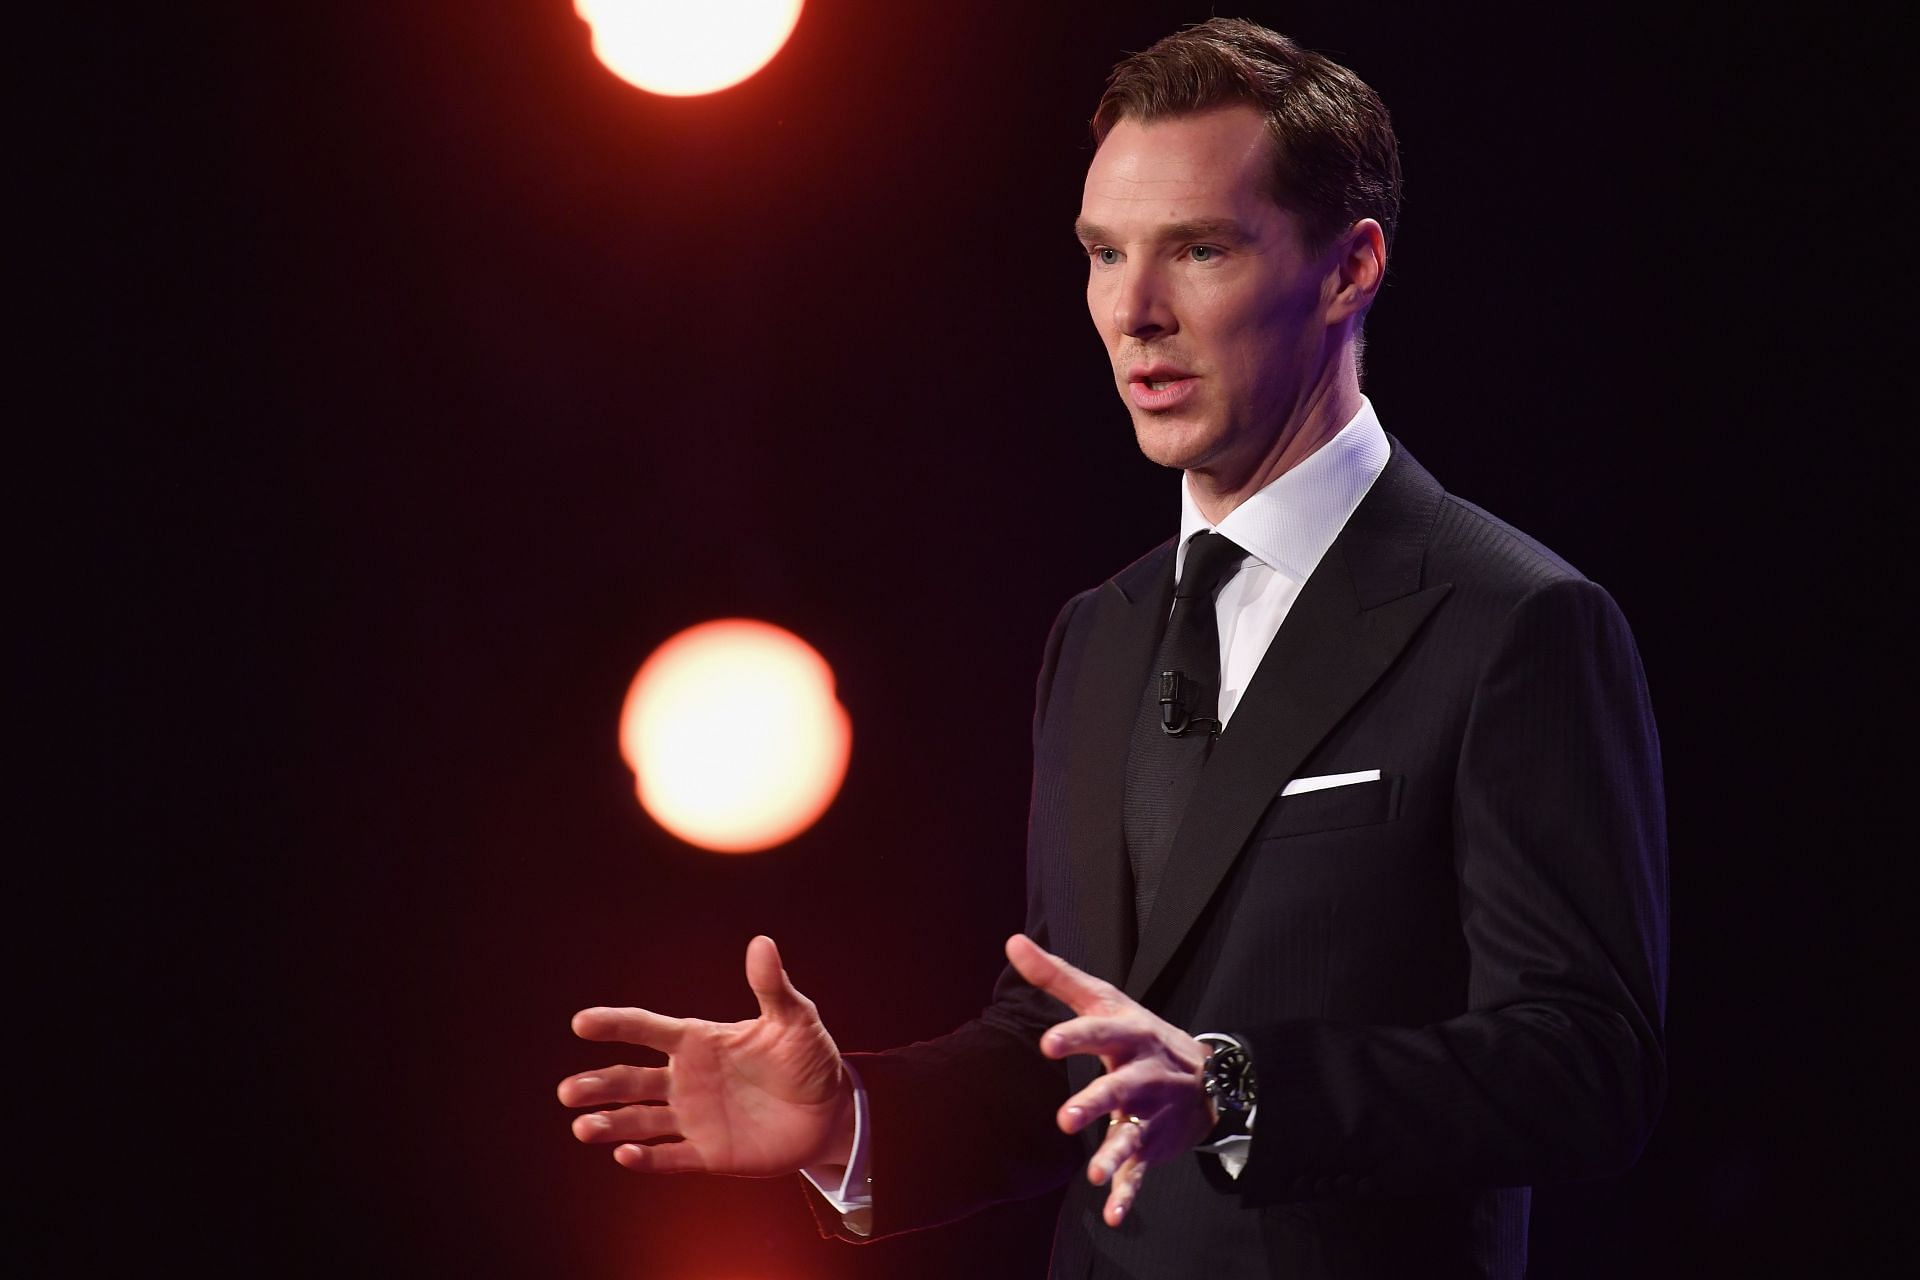 Benedict Cumberbatch earns $6.4 million for his role as the sorcerer supreme (Image via Getty Images)